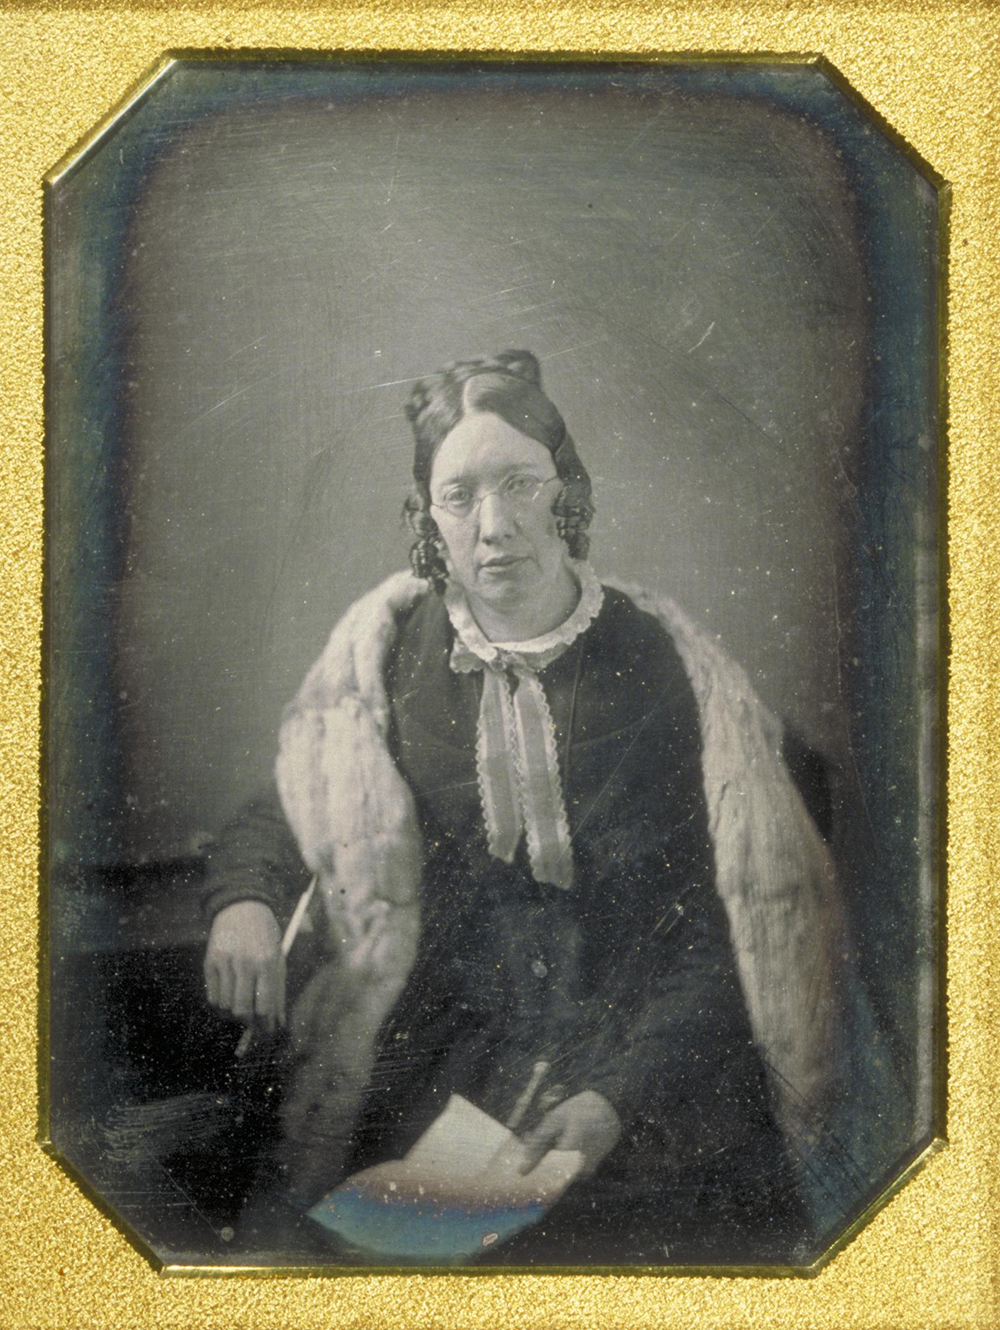 Portrait of Catharine Beecher, 1848. Photograph by W & F Langenheim. Schlesinger Library on the History of Women in America.